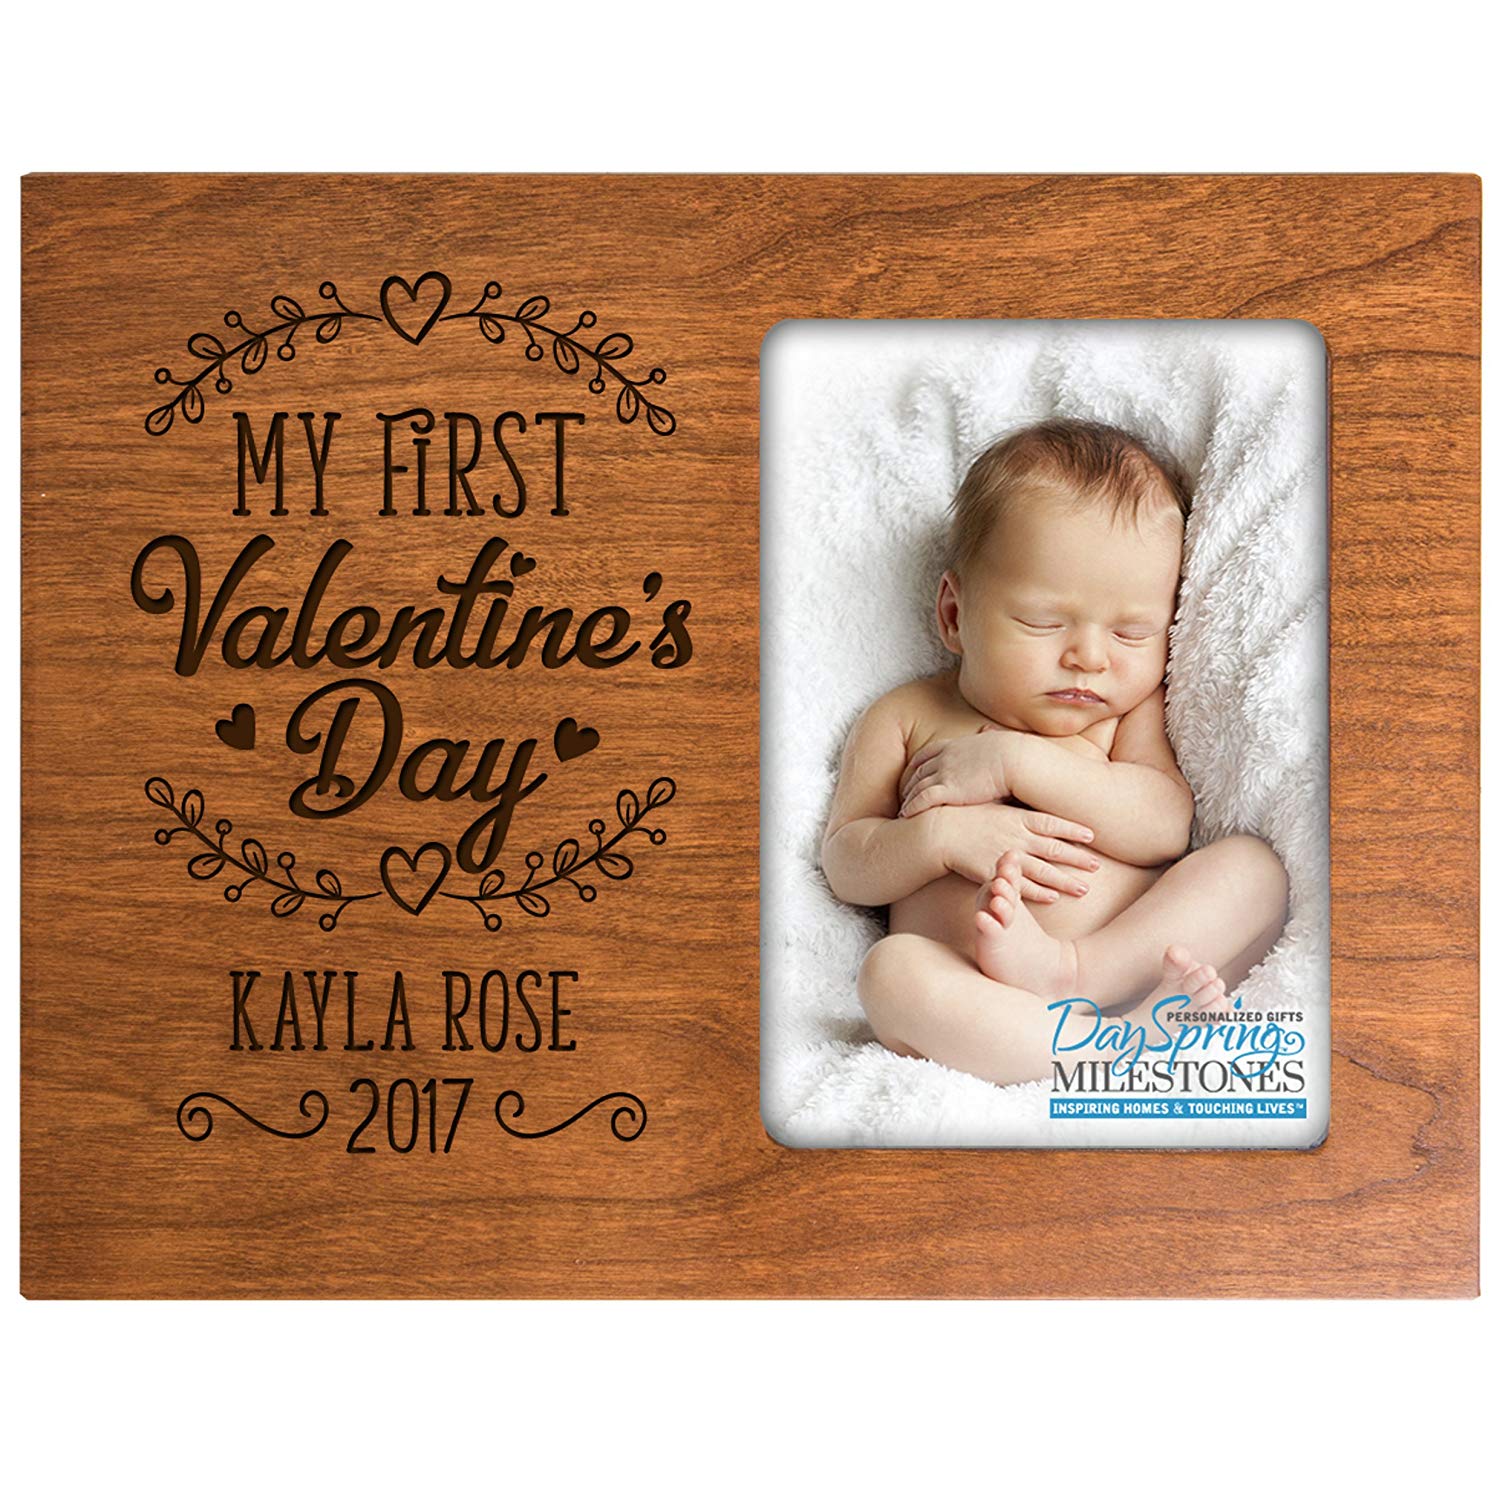 Personalized Valentine's Day Frames - My First Valentine's Day - LifeSong Milestones